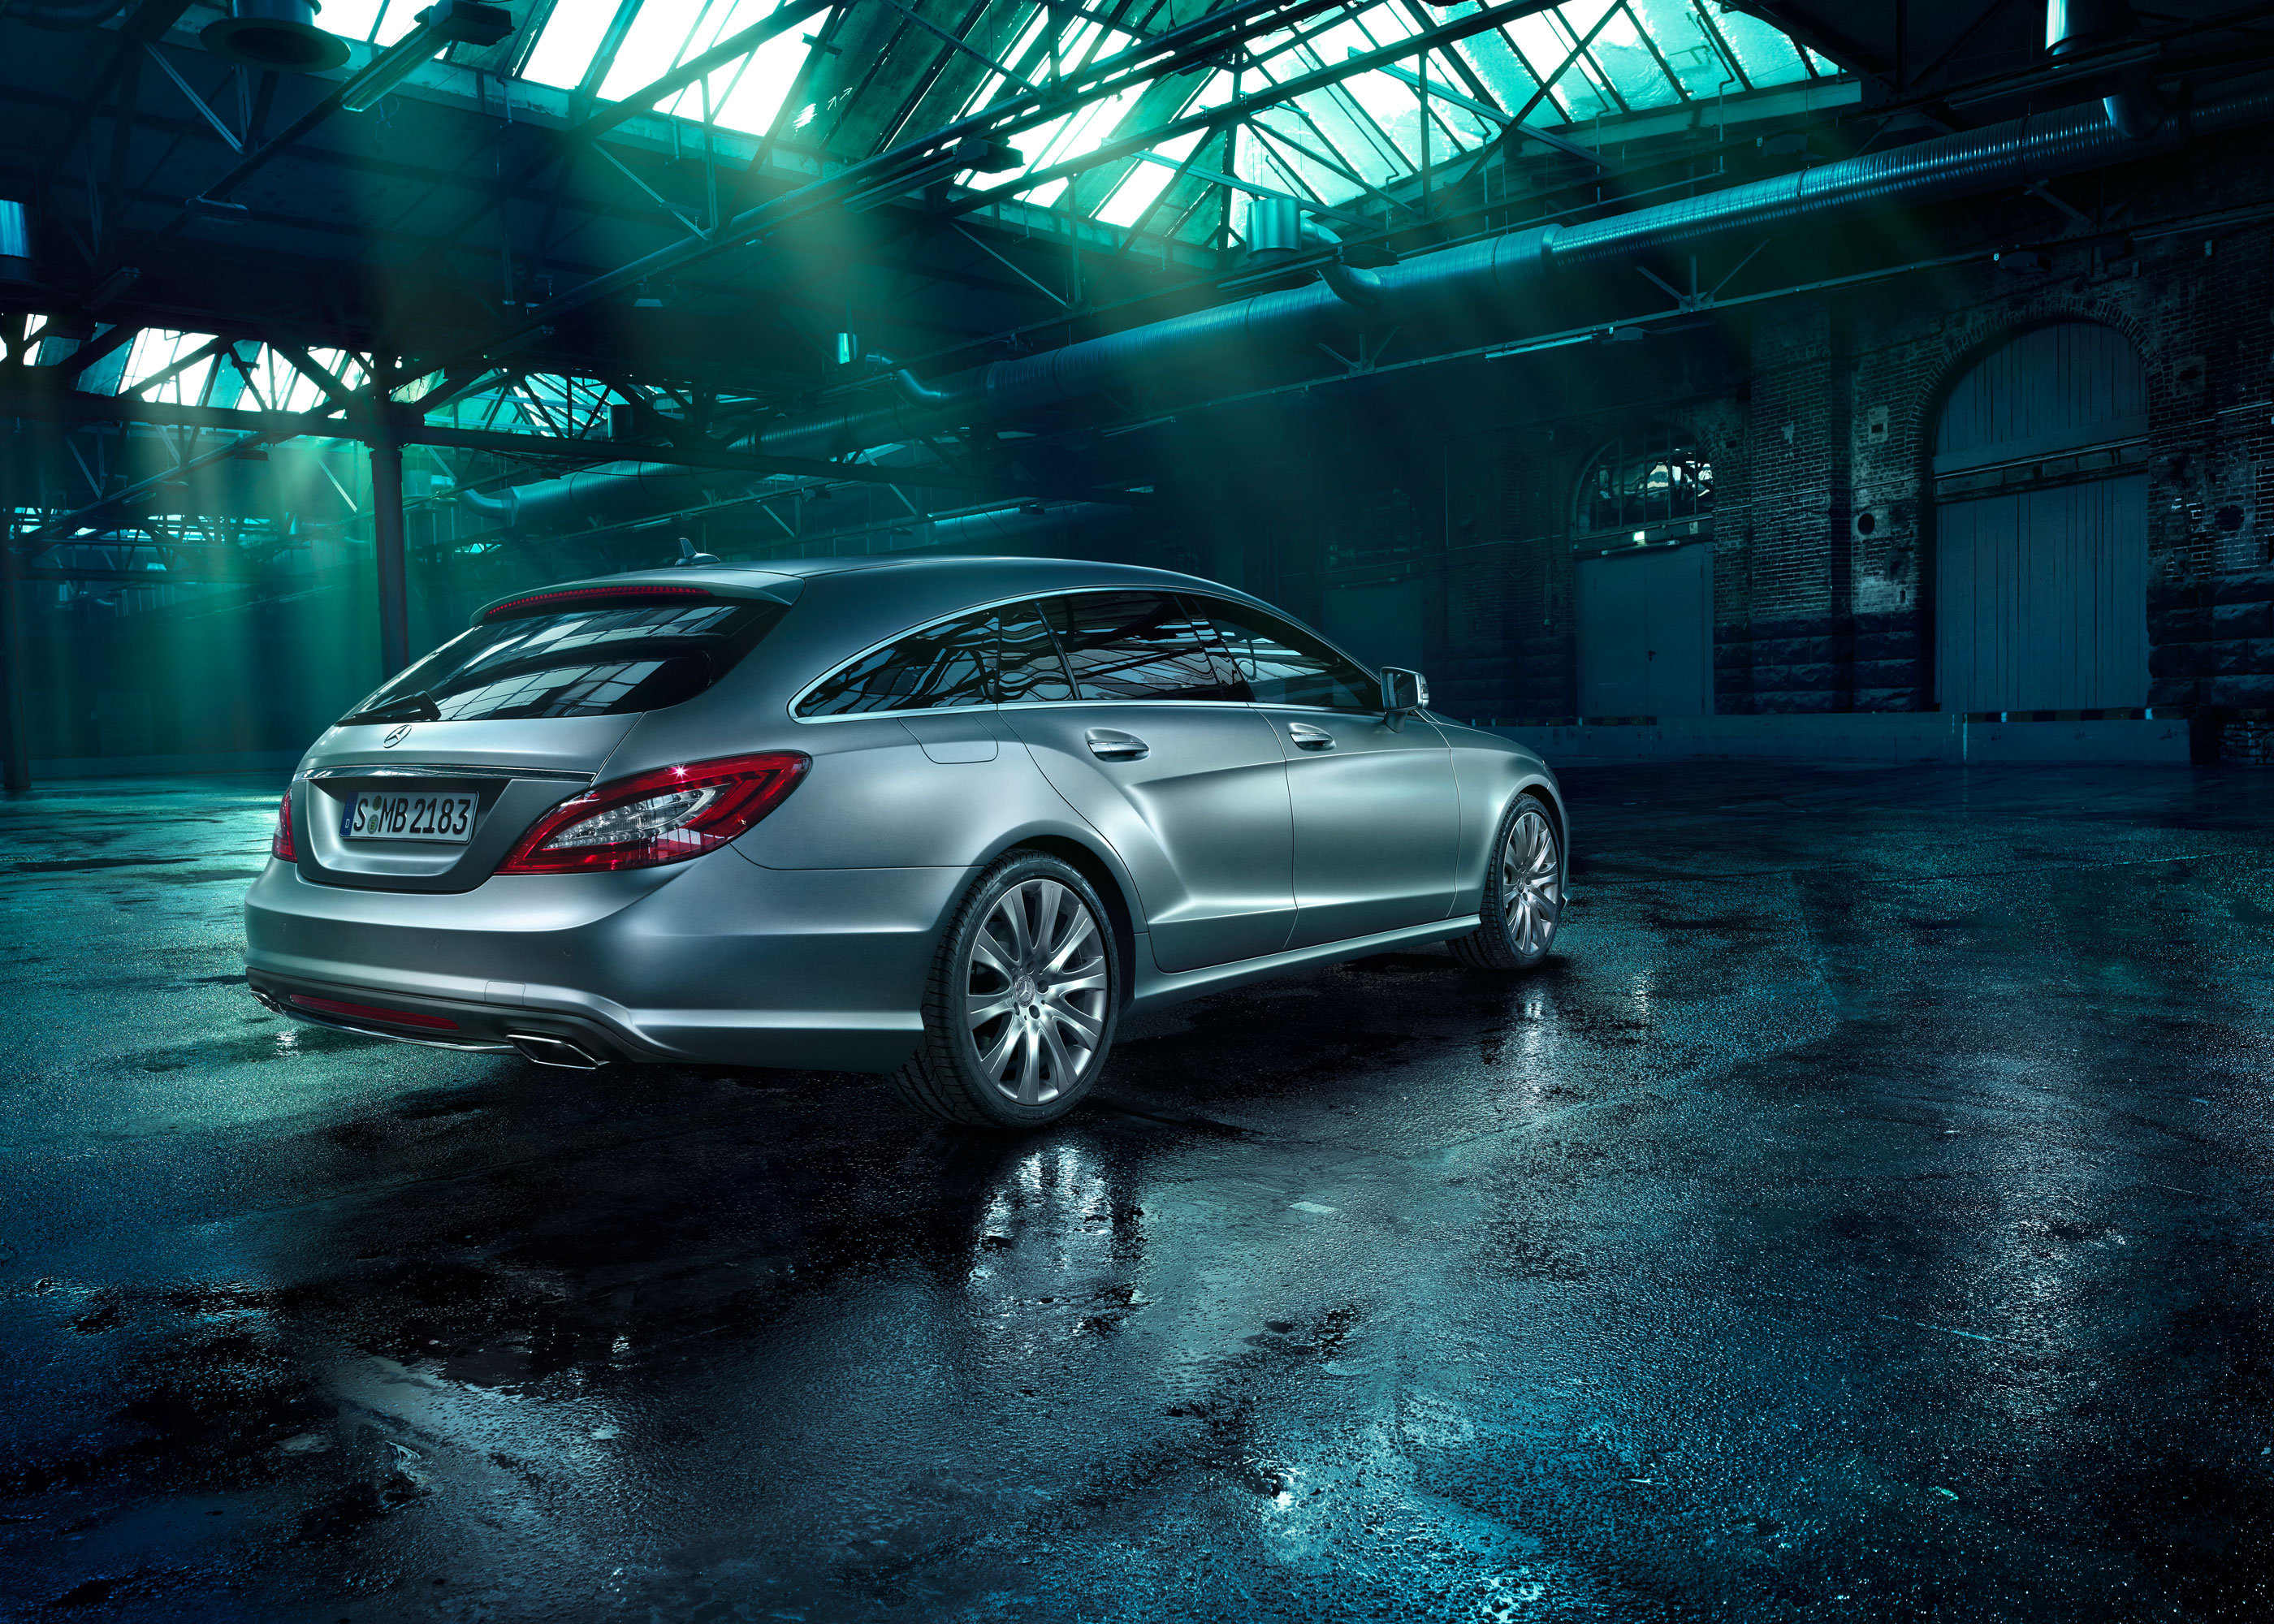 Olaf Hauschulz, Mercedes CLS Shooting Brake, Industrial places, green, natural light